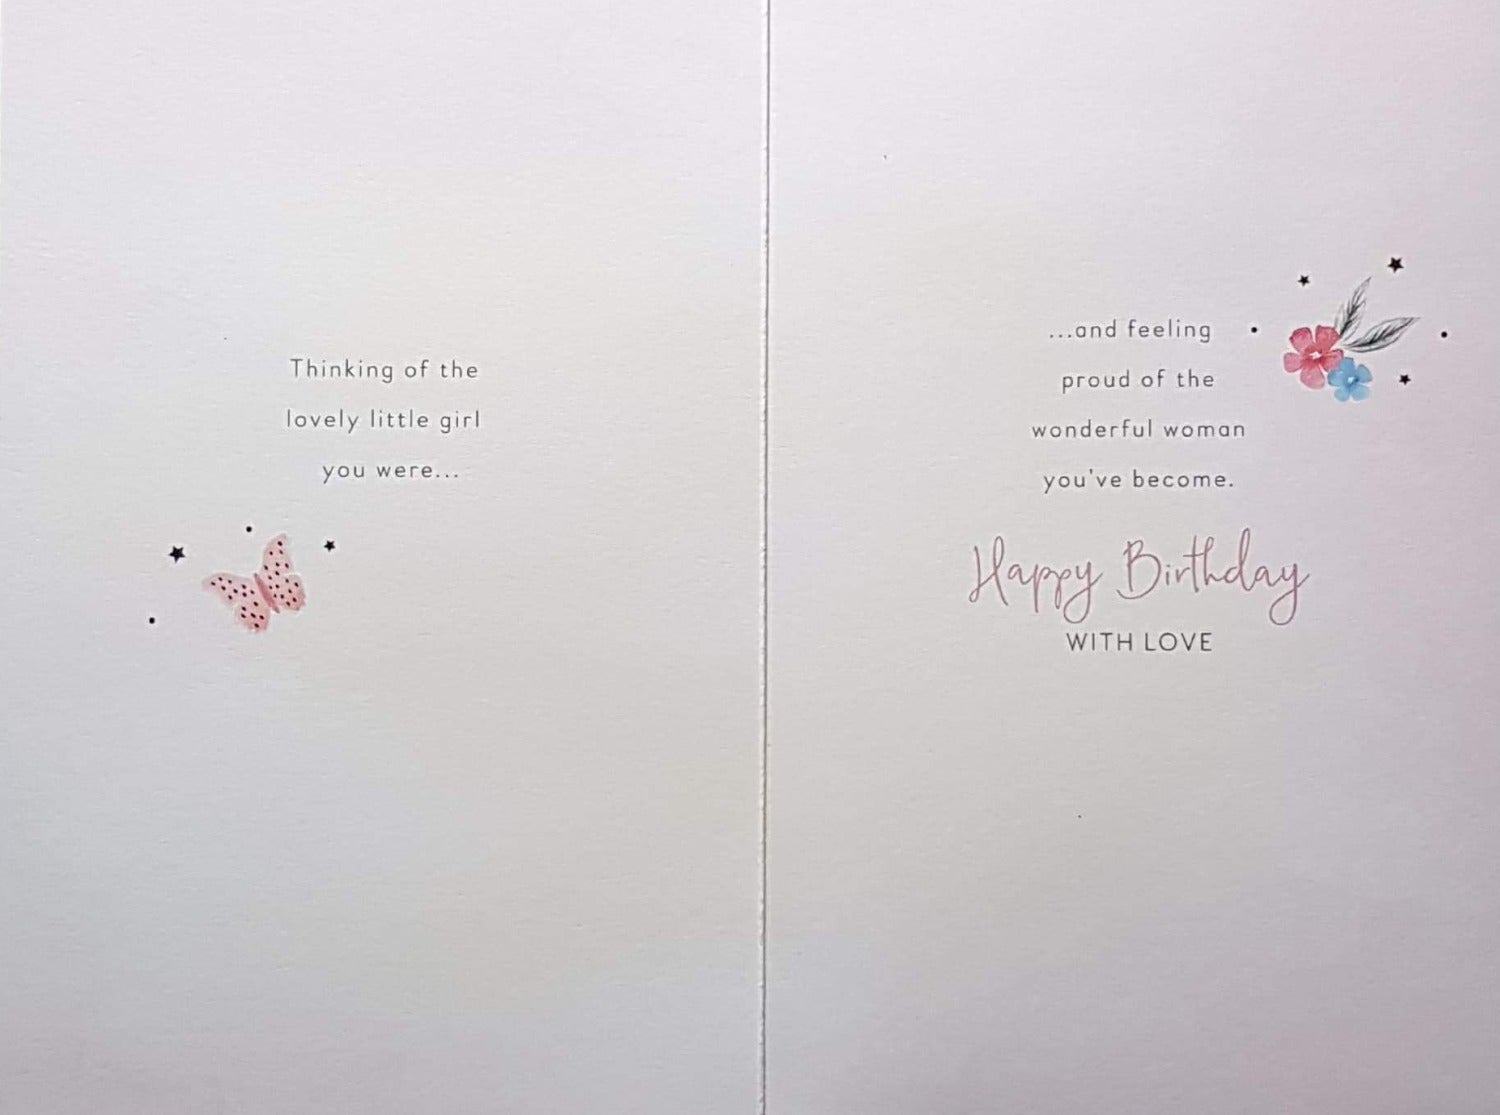 Birthday Card - Granddaughter / A Pink Cake And Candles